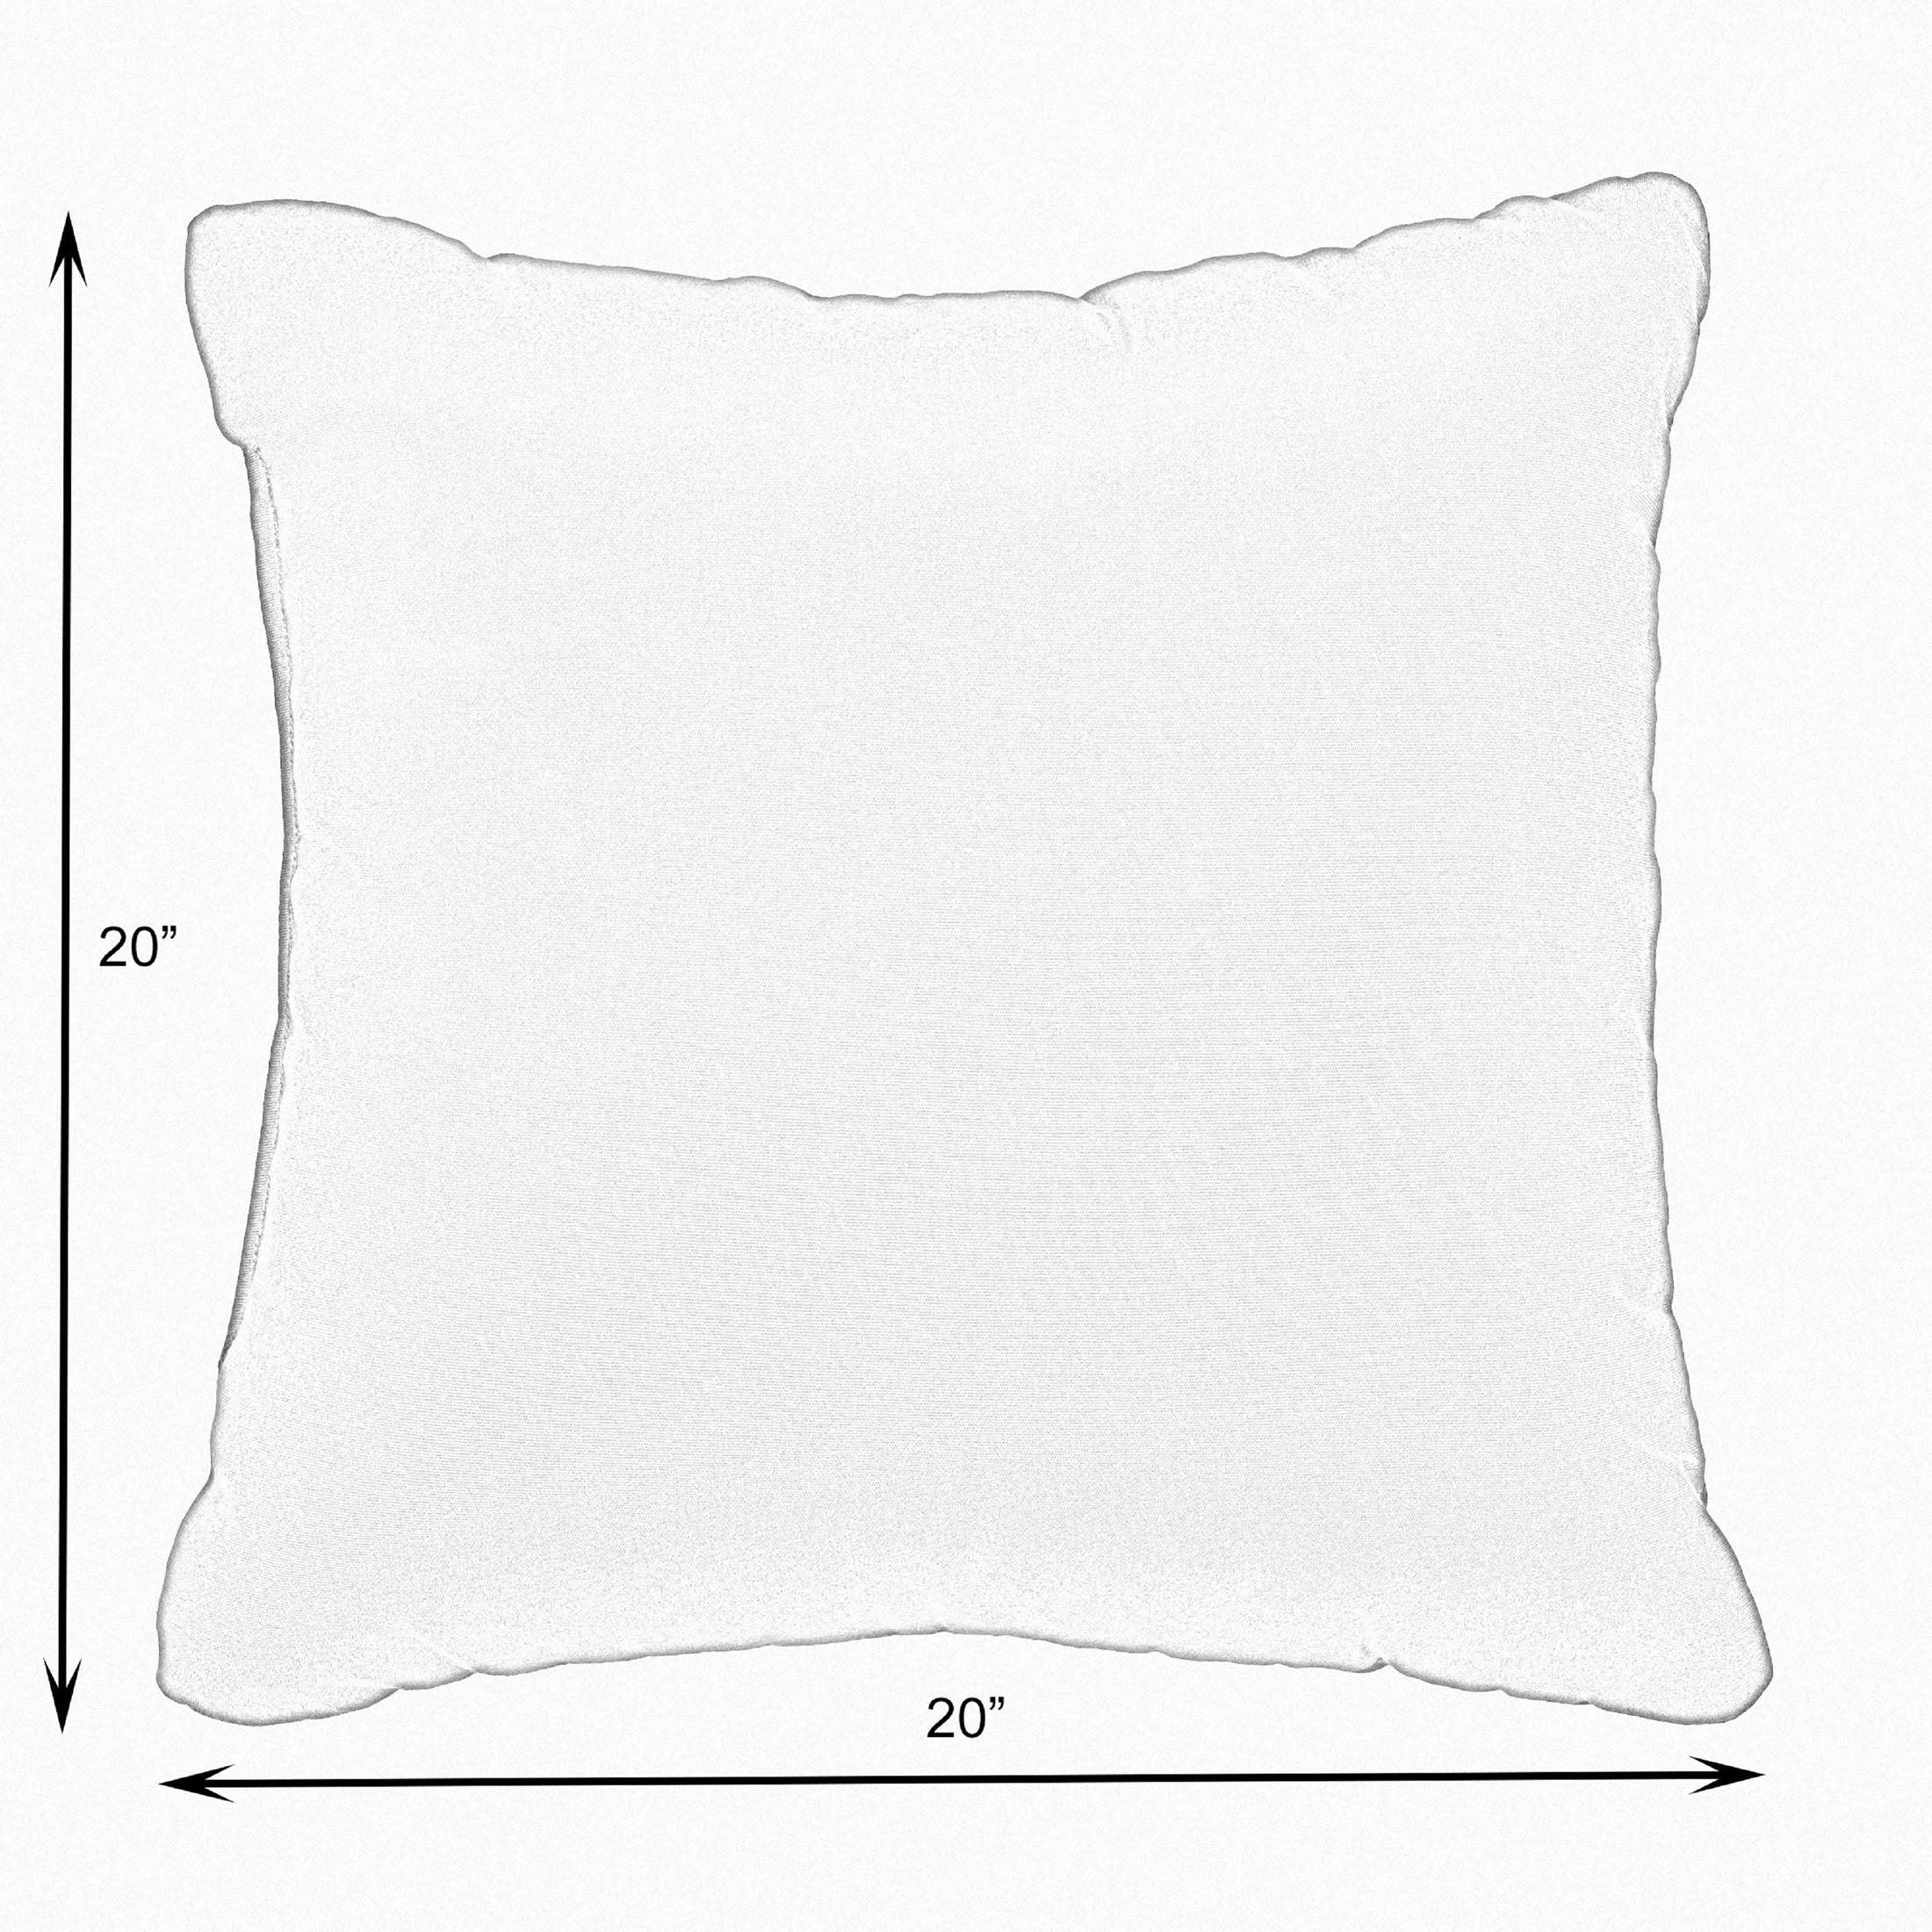 Sunbrella Cabana with Contrast Cording Square Corded Pillow (Set of 2) - Sorra Home